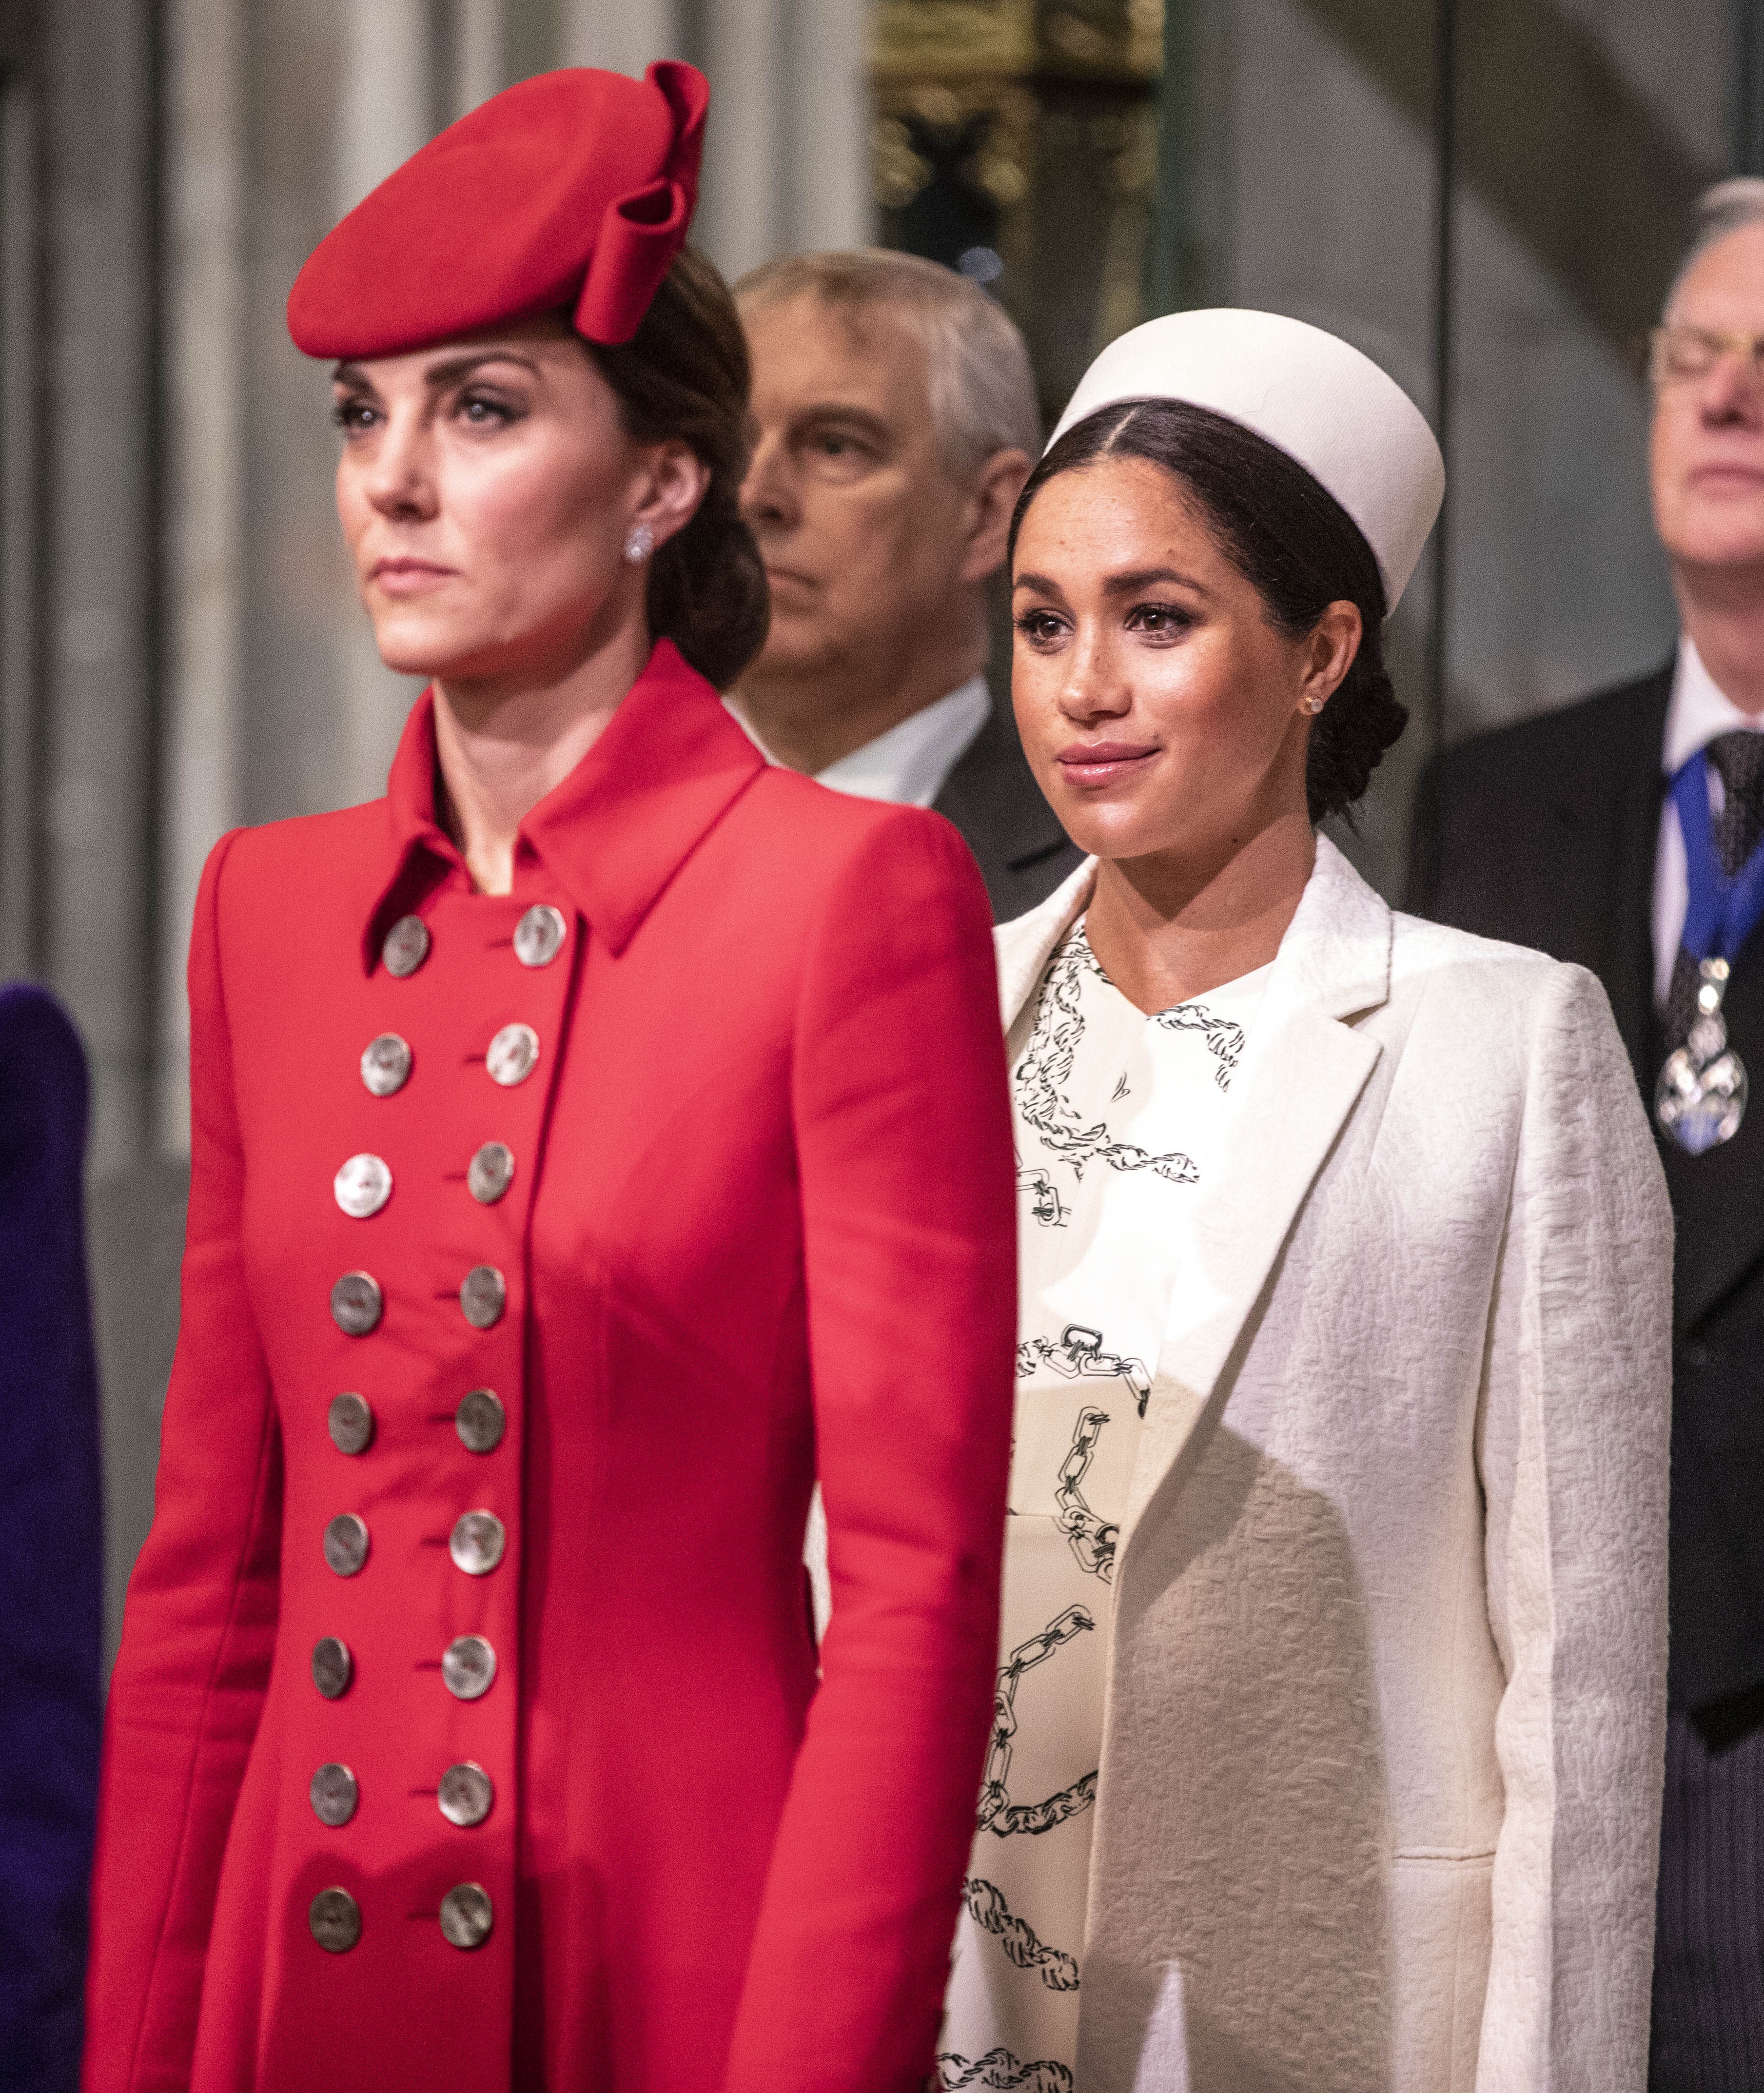 The Duchess of Cambridge stands with Duchess of Sussex at Westminster Abbey for a Commonwealth day service on March 11, 2019 in London, England | Photo: Getty Images